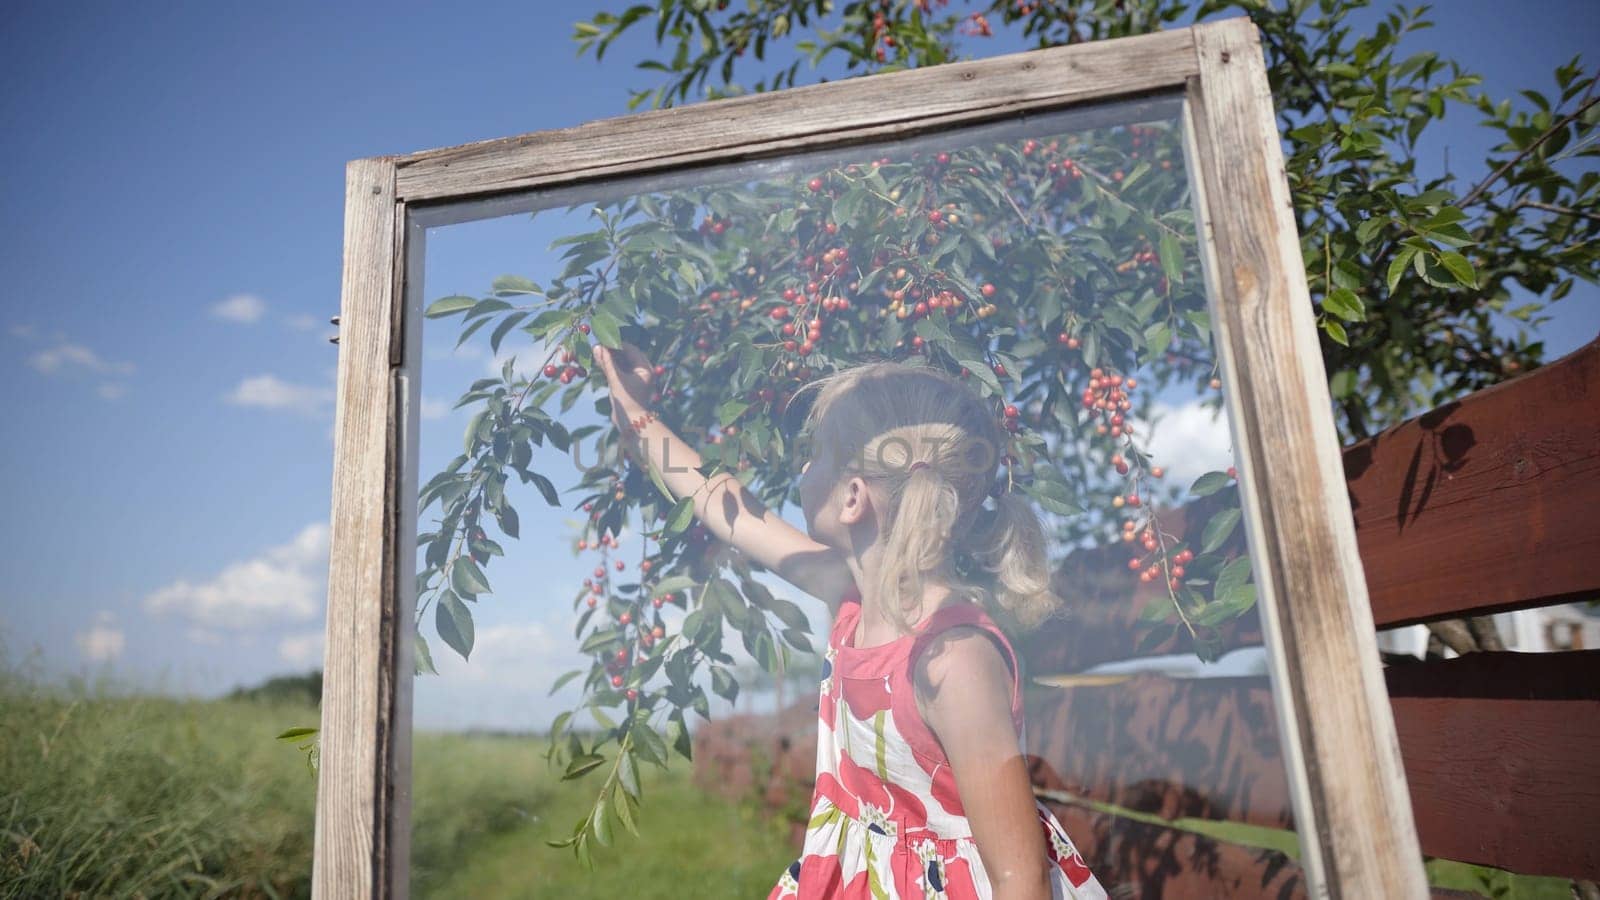 A little girl eats cherries on the background of a window in the garden